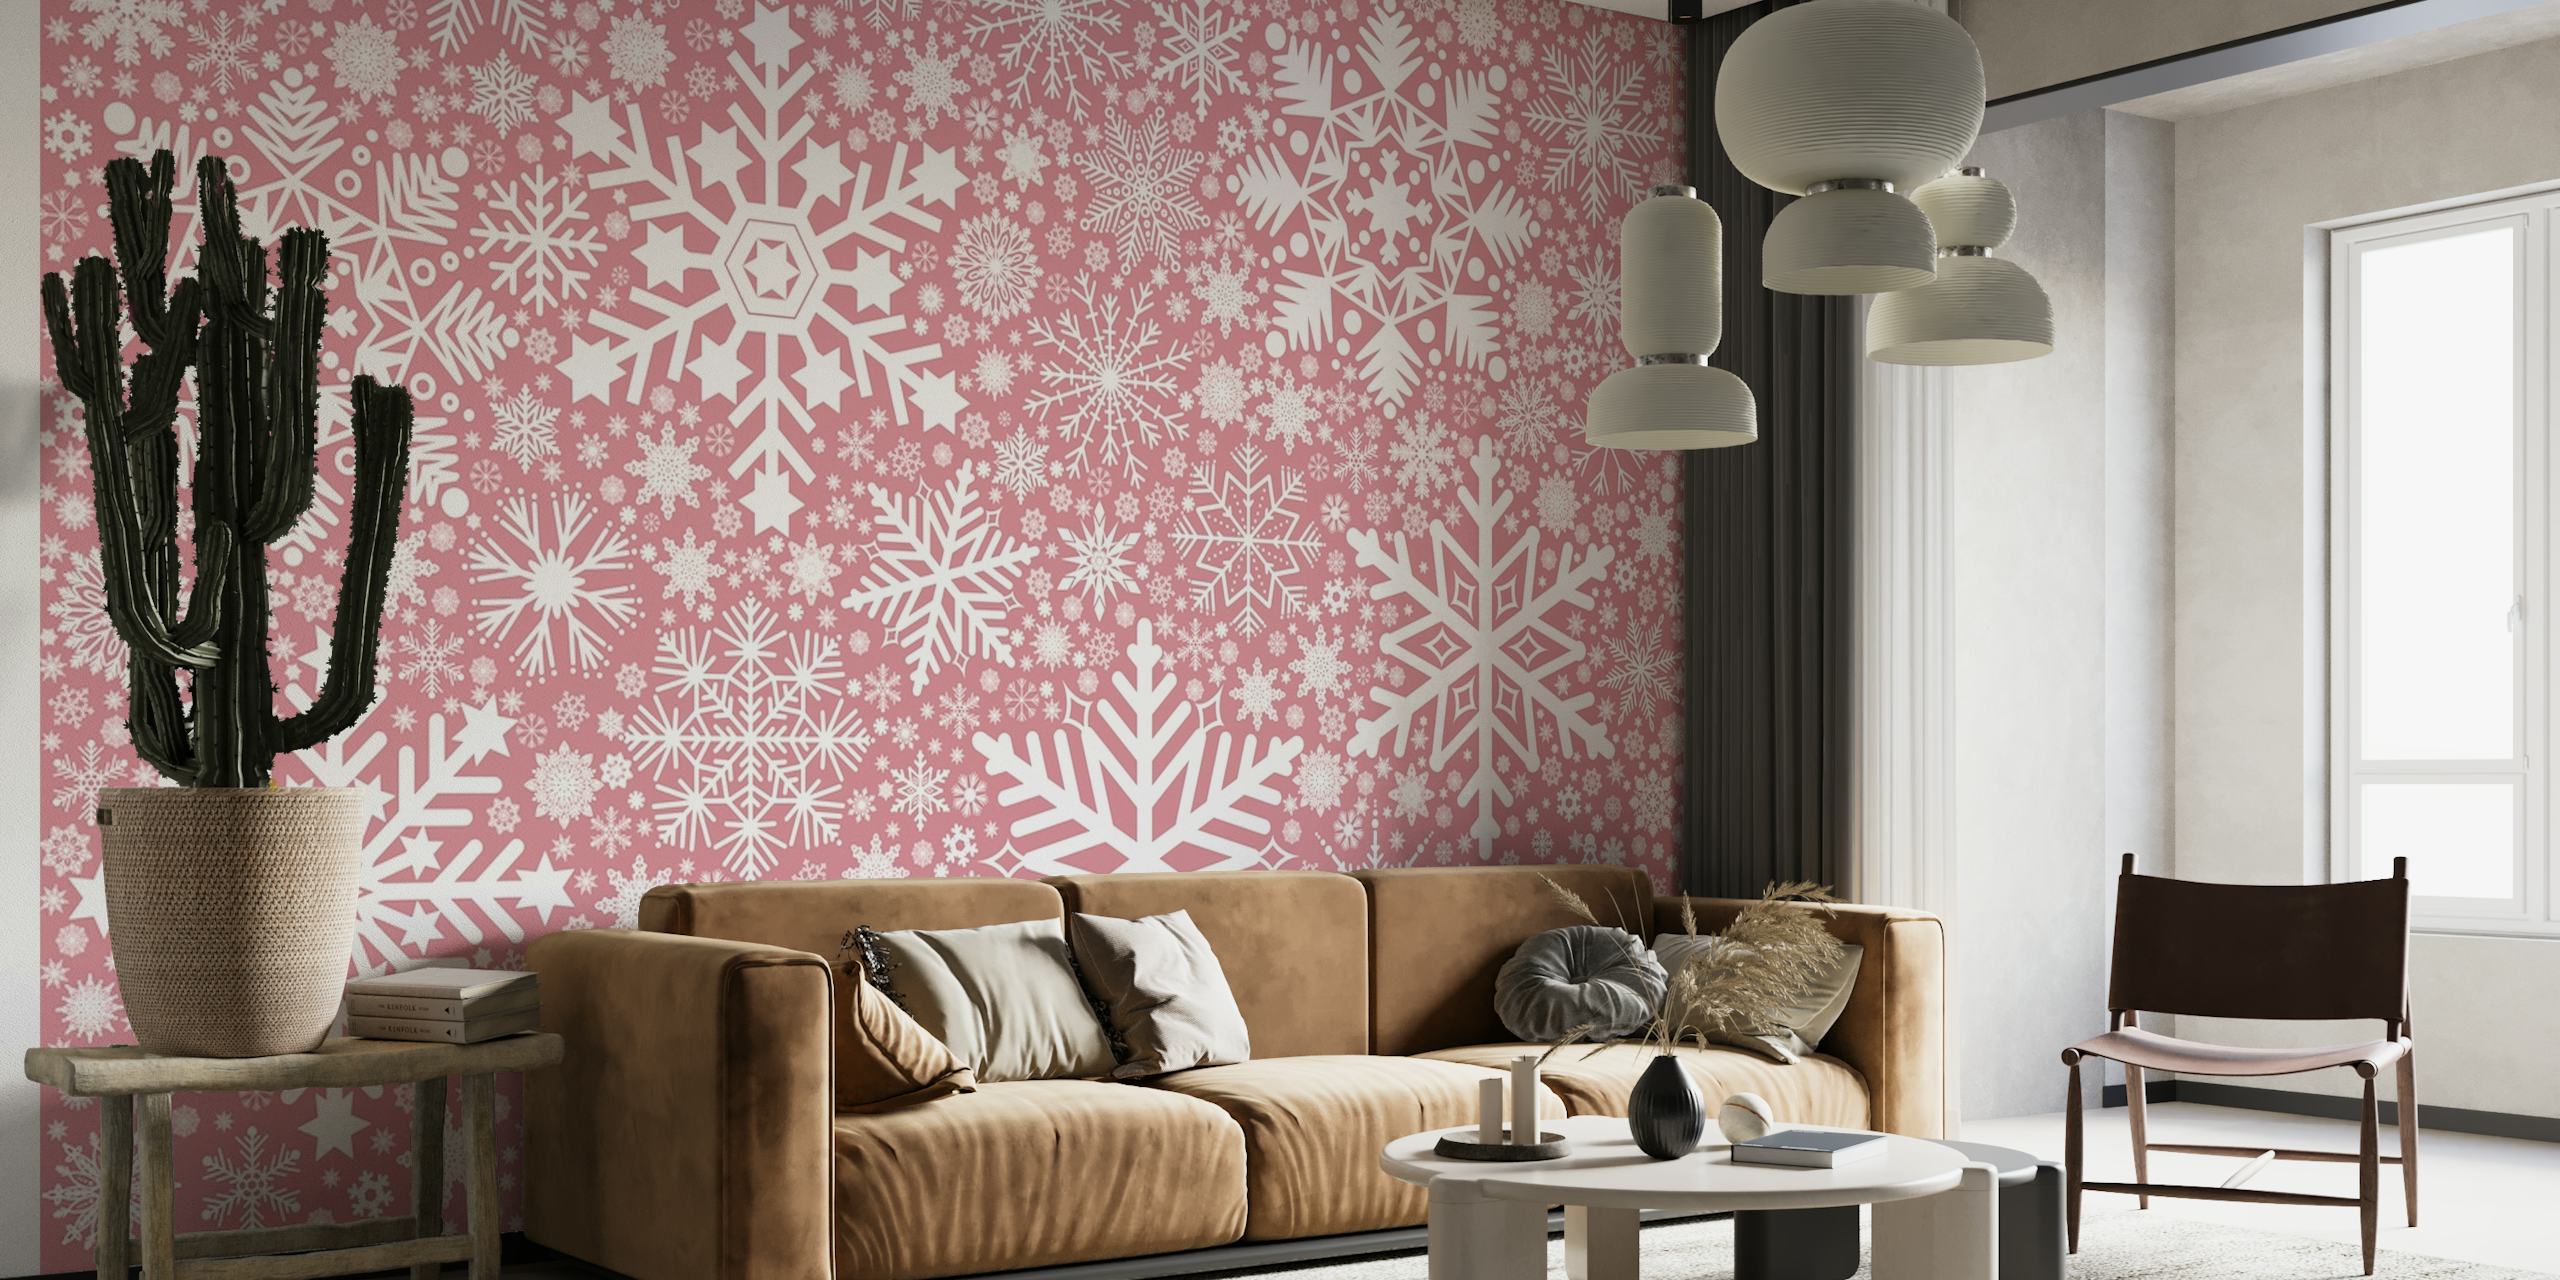 Elegant pink snowflake pattern wall mural for cozy interior decoration